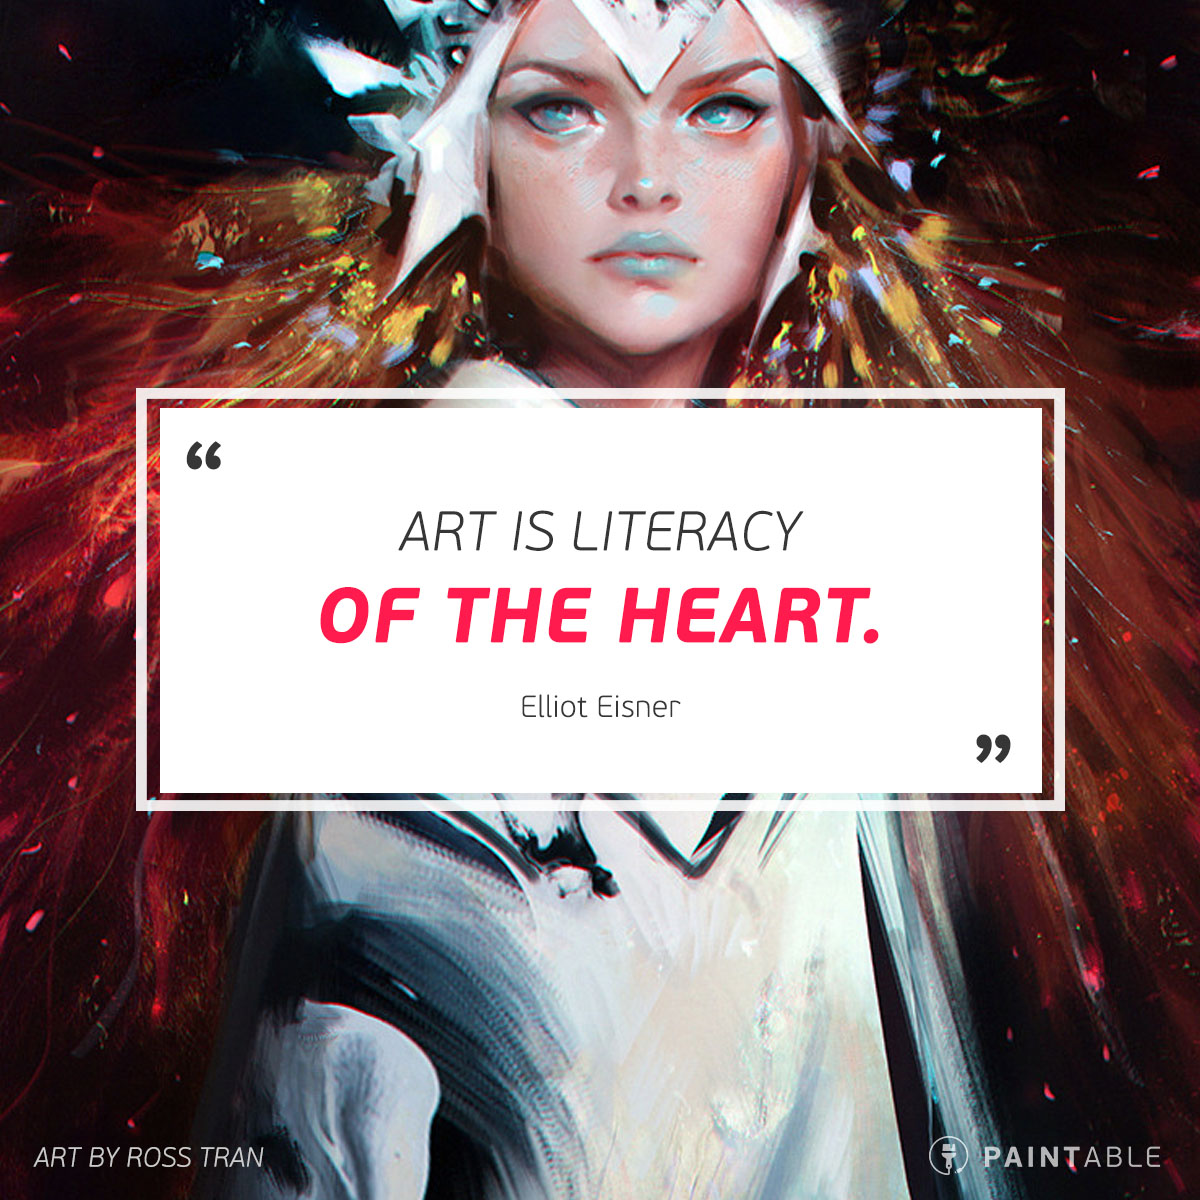 Ross Tran | 25 Inspirational Artist Quotes for Creatives and Digital Painters